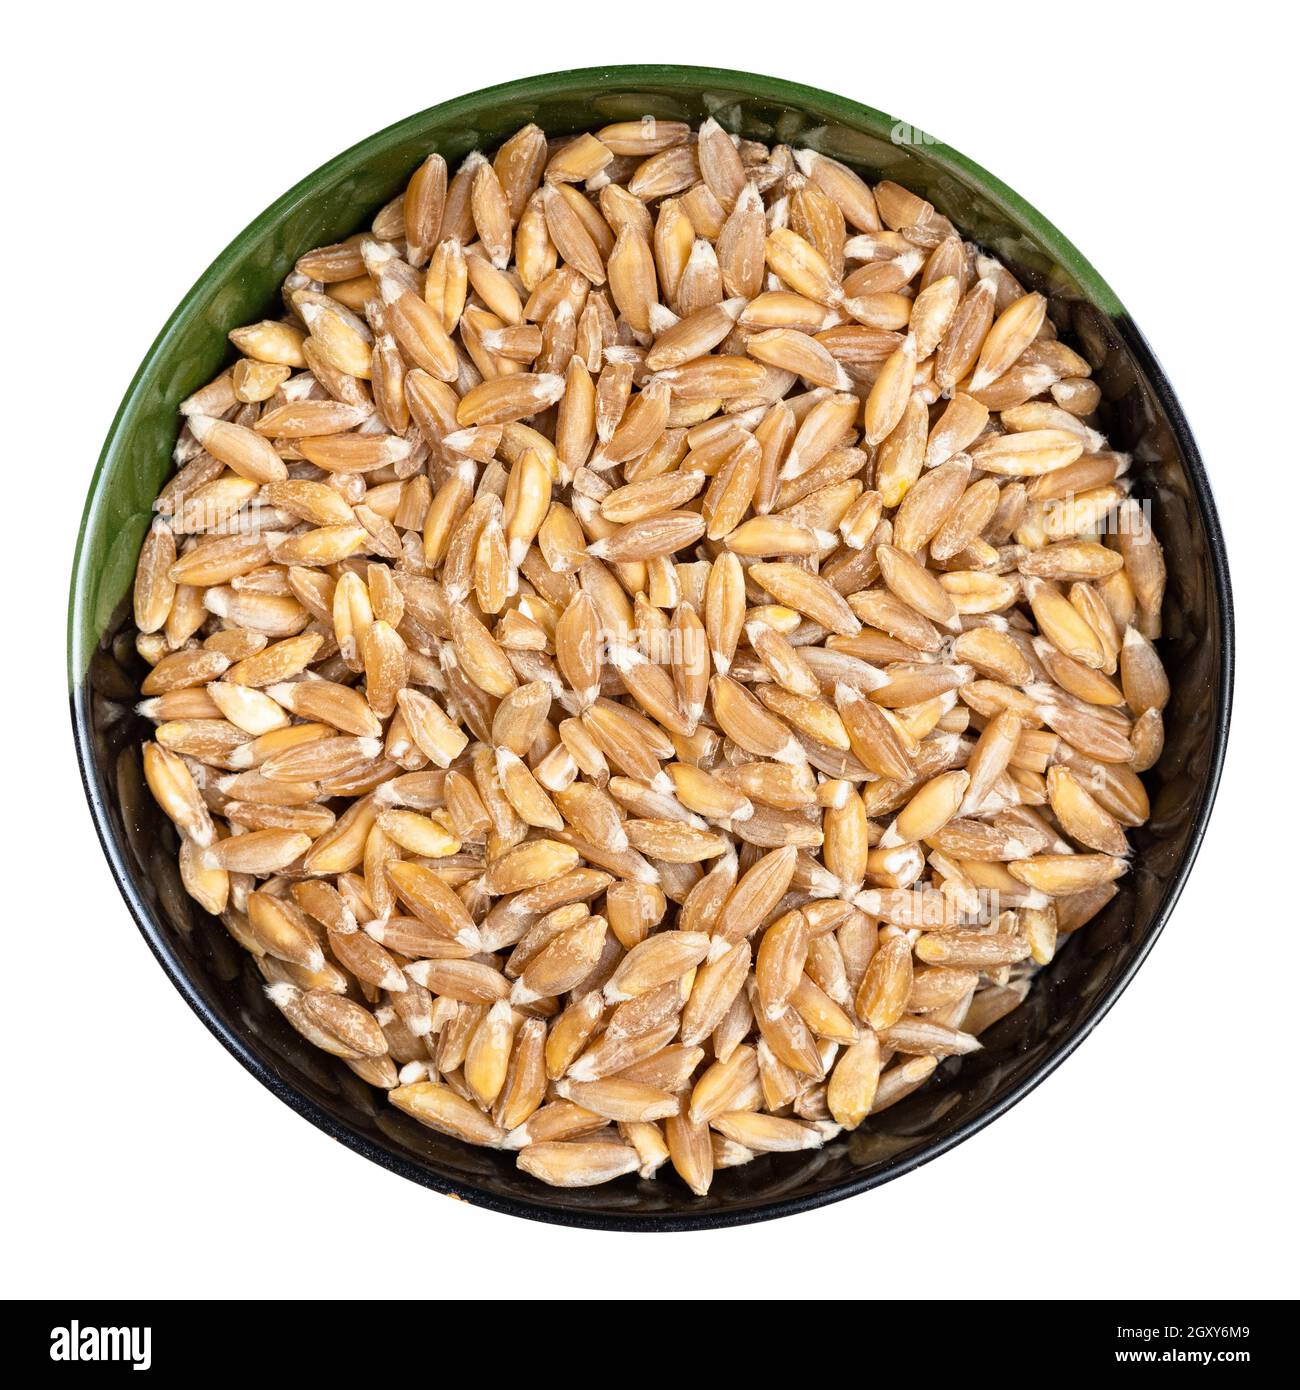 top view of Emmer farro hulled wheat grains in round bowl isolated on white background Stock Photo